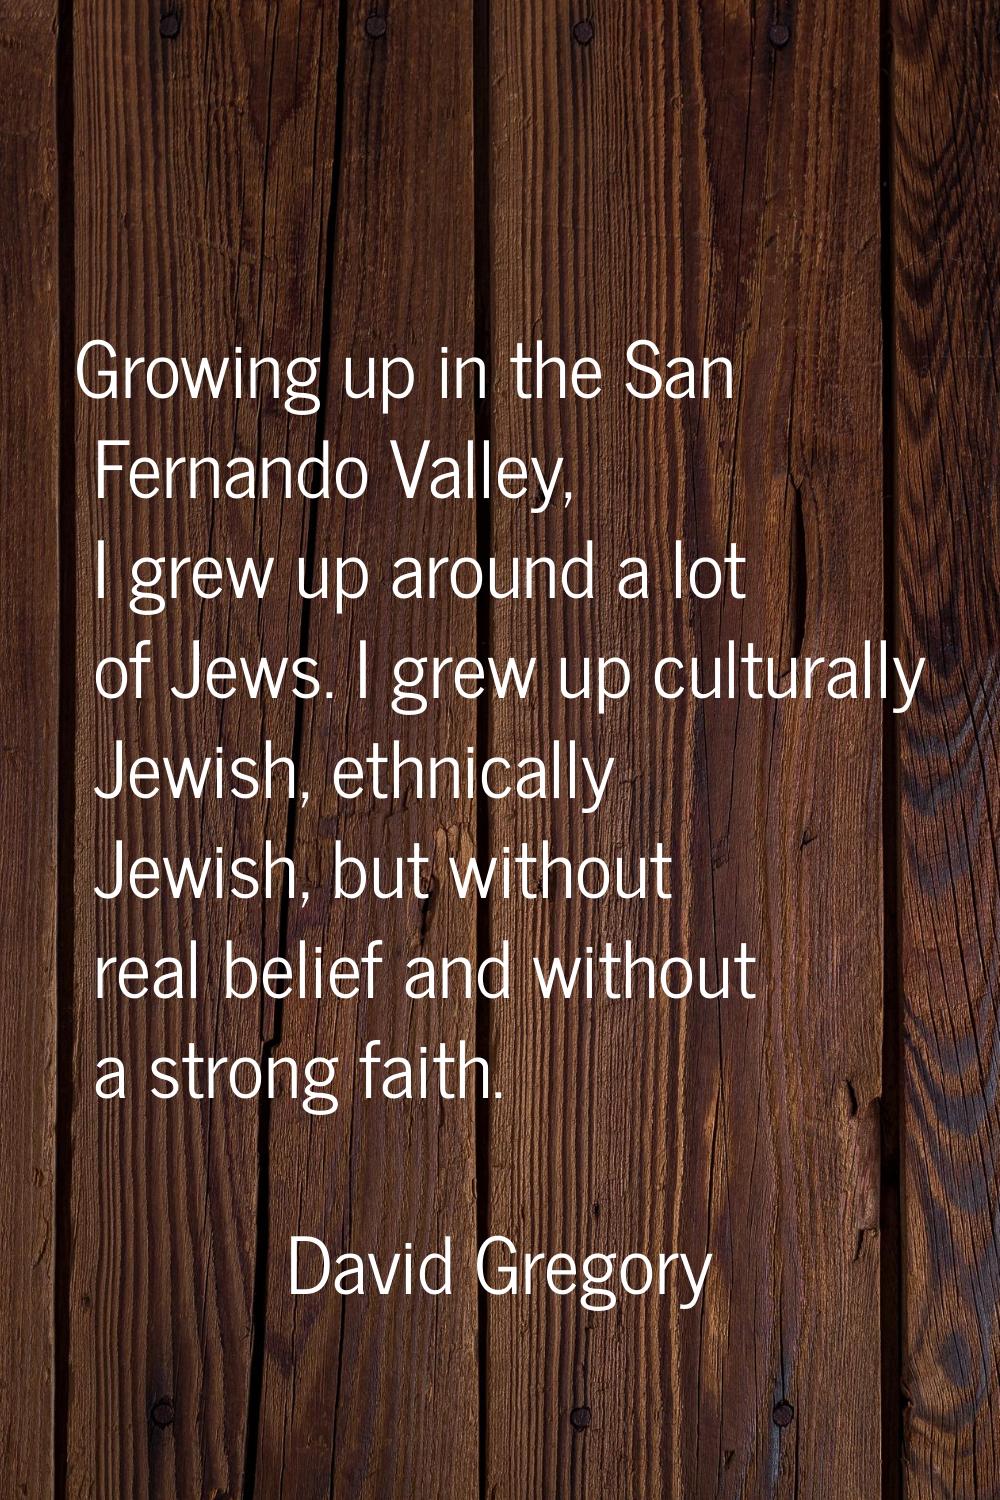 Growing up in the San Fernando Valley, I grew up around a lot of Jews. I grew up culturally Jewish,